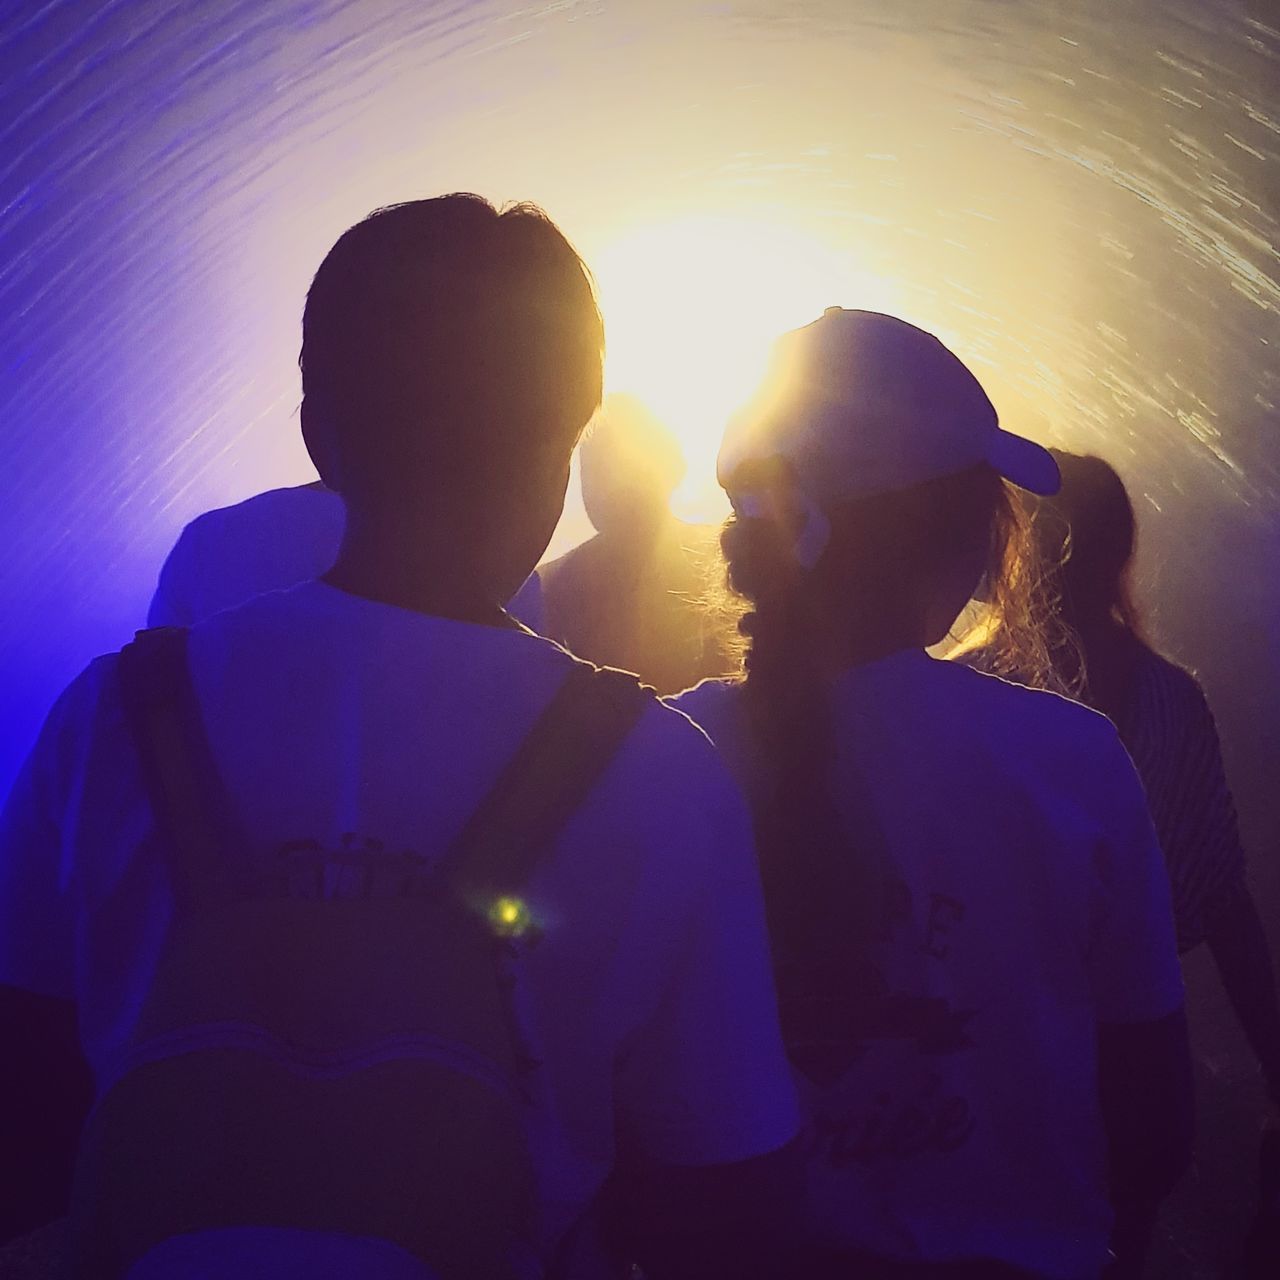 two people, couple - relationship, togetherness, bonding, love, romance, men, positive emotion, real people, women, emotion, lifestyles, heterosexual couple, adult, leisure activity, connection, young men, sky, sunset, kissing, lens flare